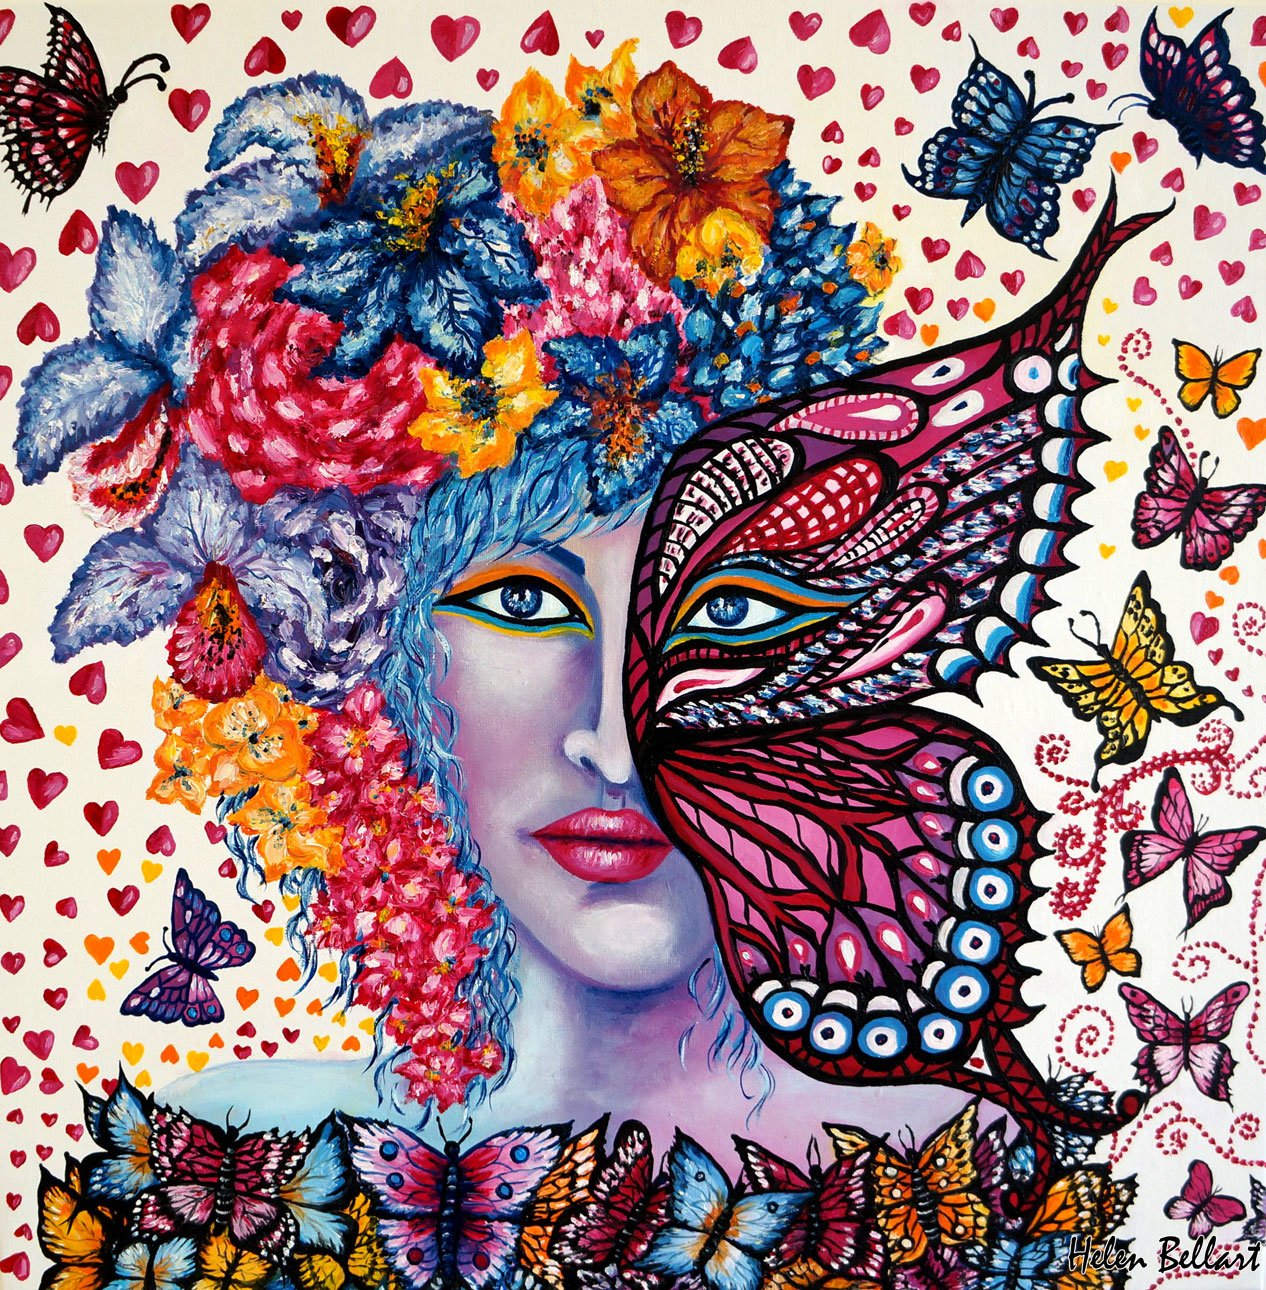 Helen Bellart; Fall In Love, 2017, Original Painting Oil, 50 x 50 cm. Artwork description: 241 Fall in love, oil on canvas, 50x50cm, My new artwork reflects a woman who fall in love and has butterflies in her stomach and a fantastic feeling in the heart. DonA't find love, let love find you ThatA's why is called falling in love because ...